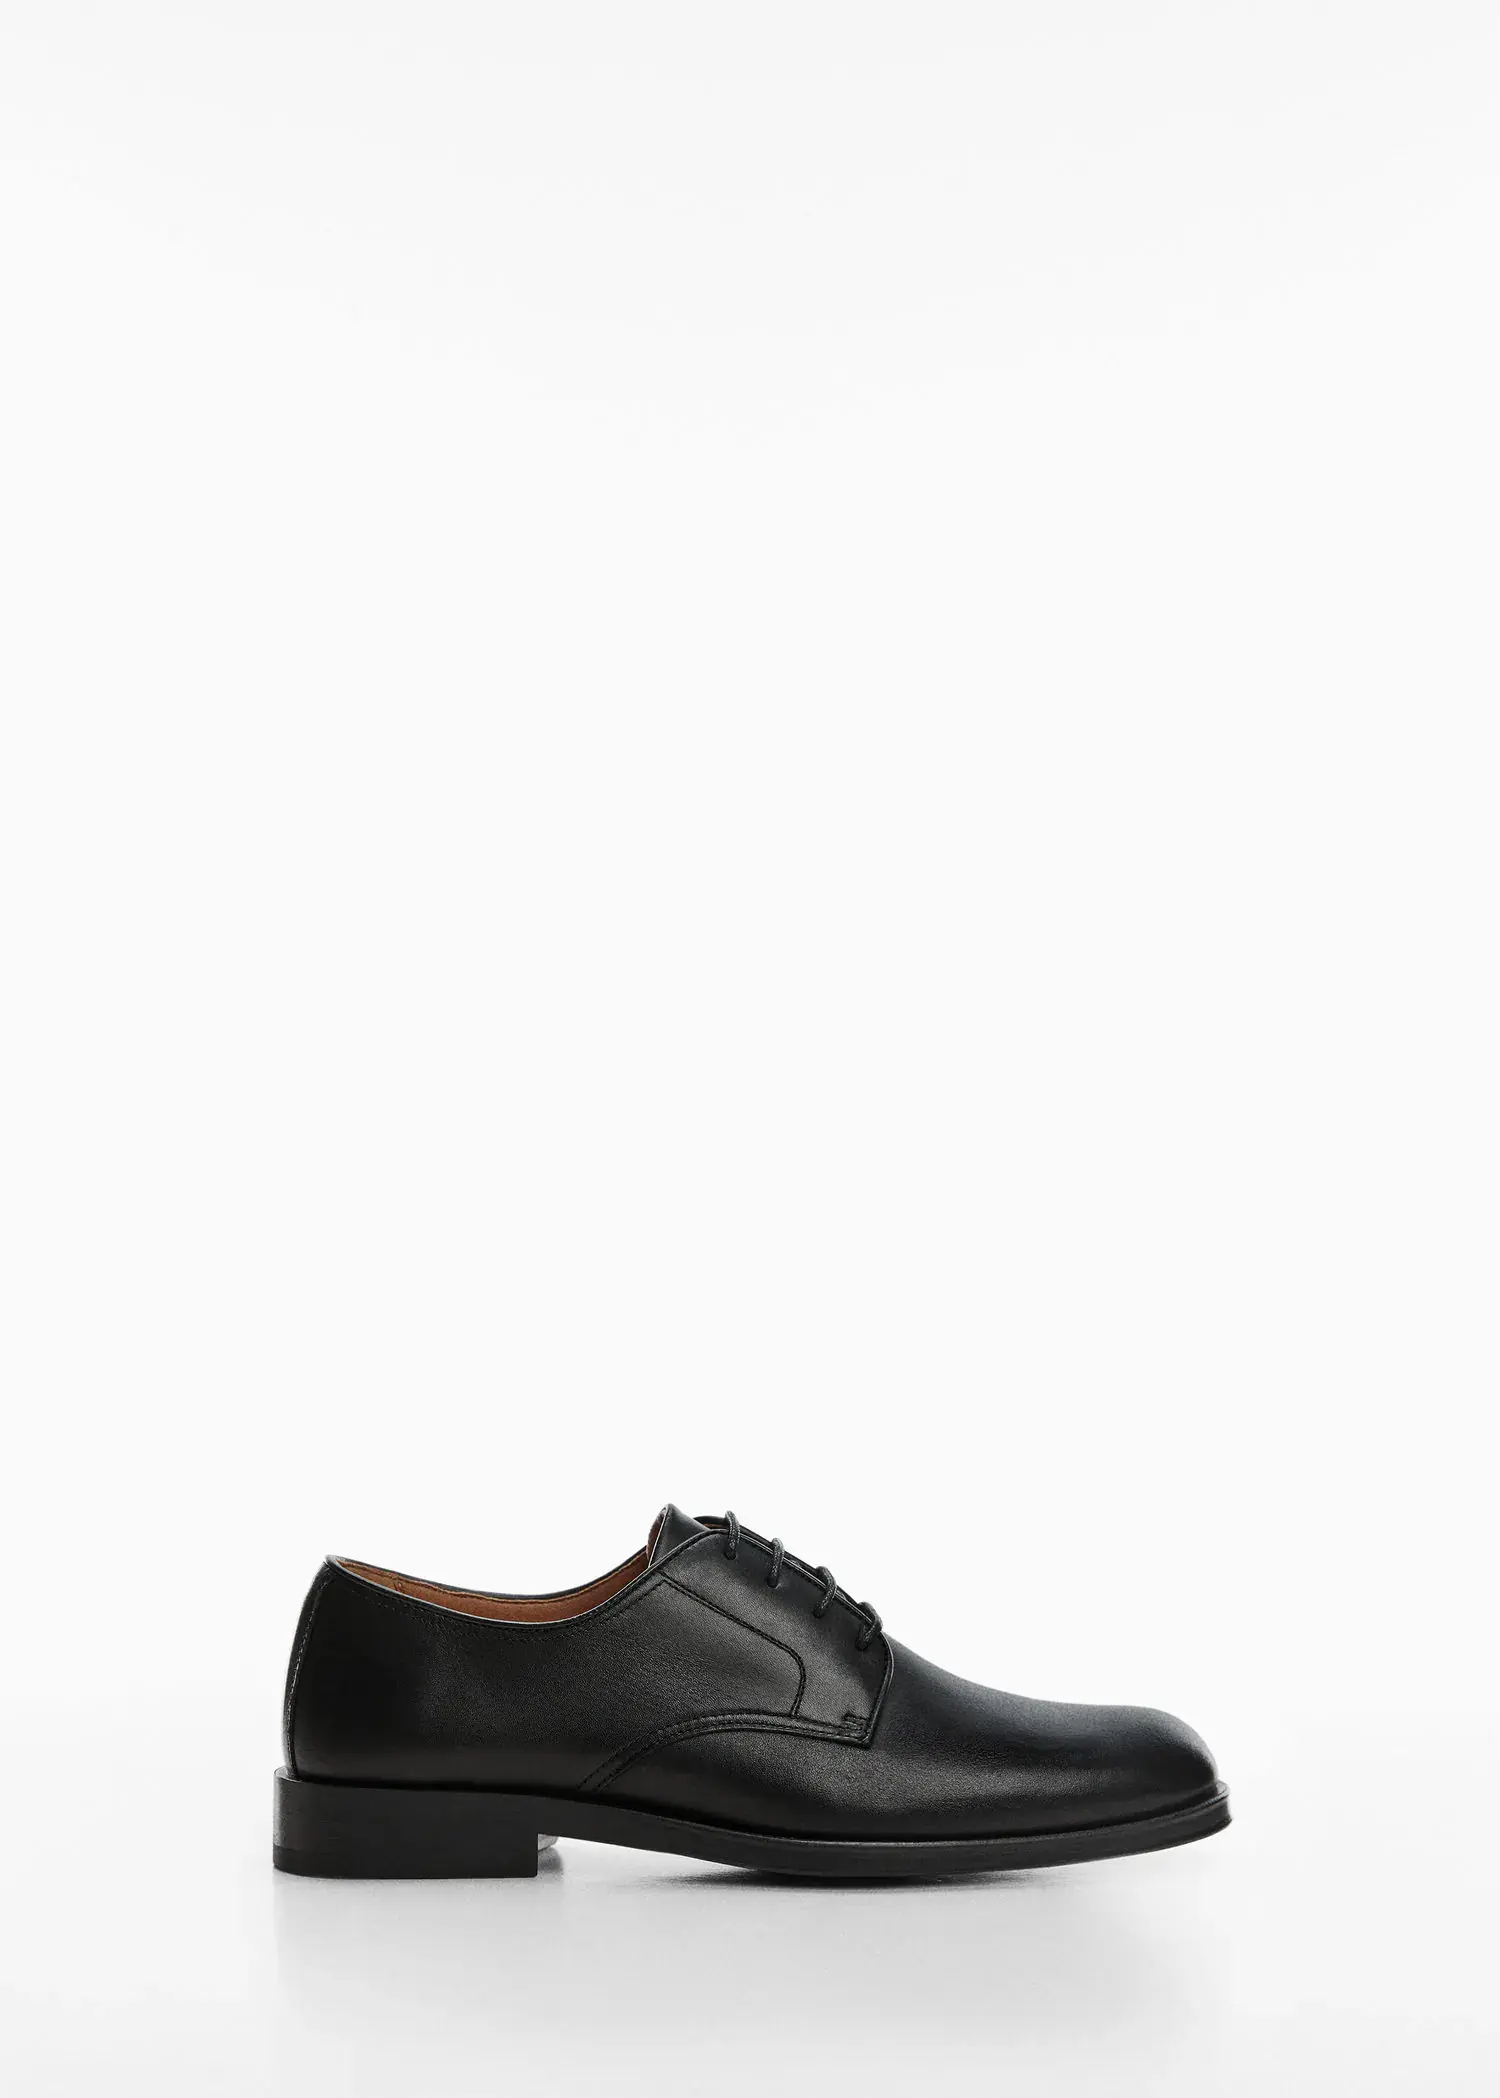 Mango Leather suit shoes. a pair of black shoes on a white background. 